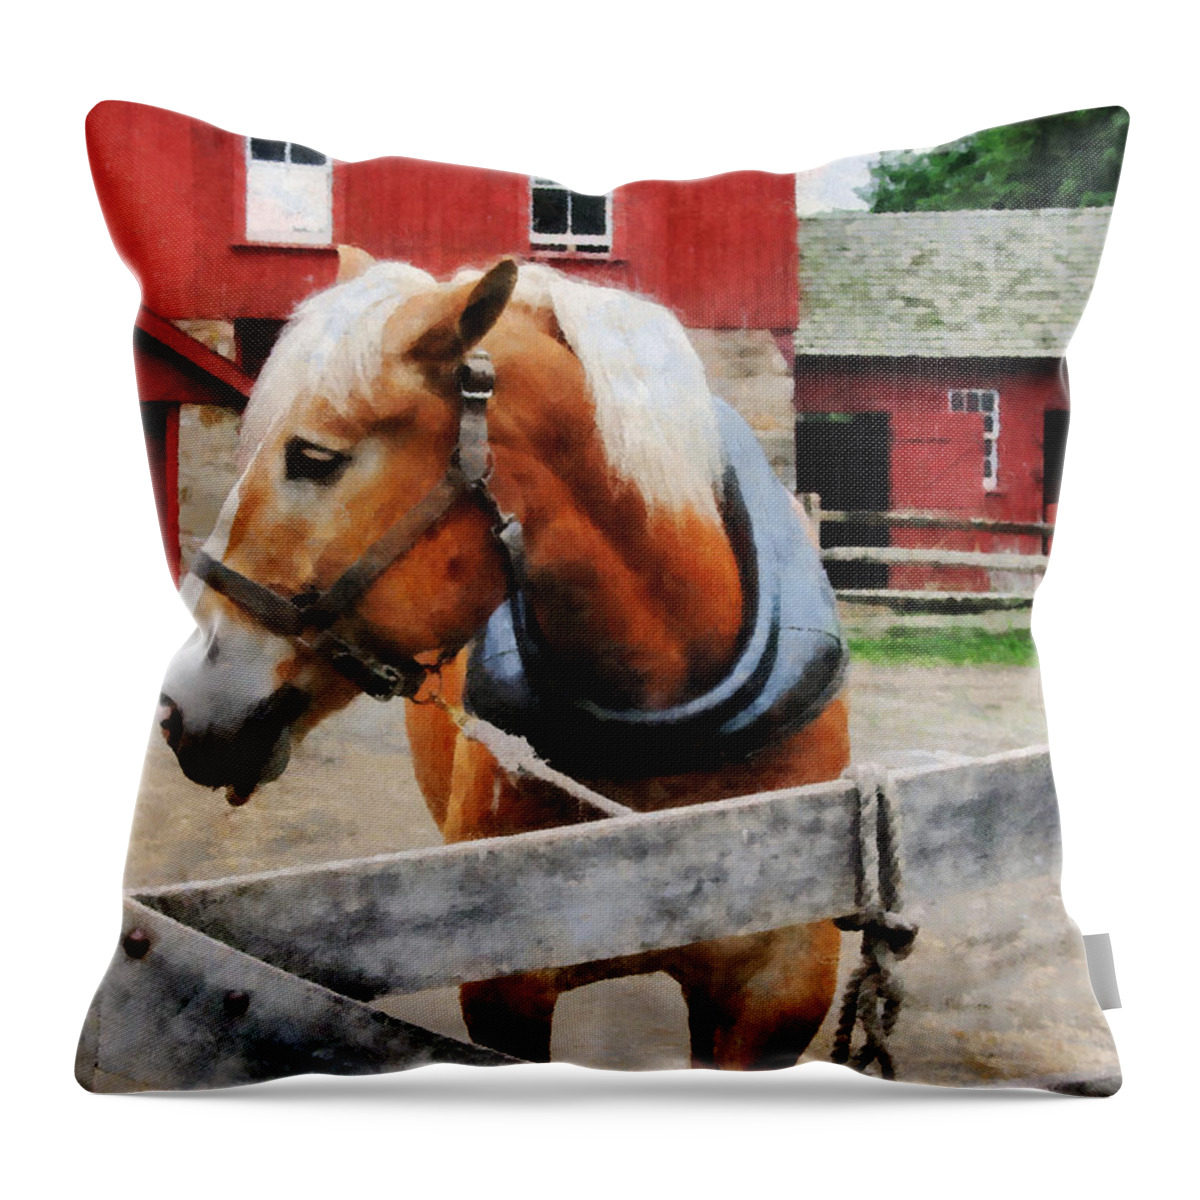 Horse Throw Pillow featuring the photograph Palomino By Red Barn by Susan Savad